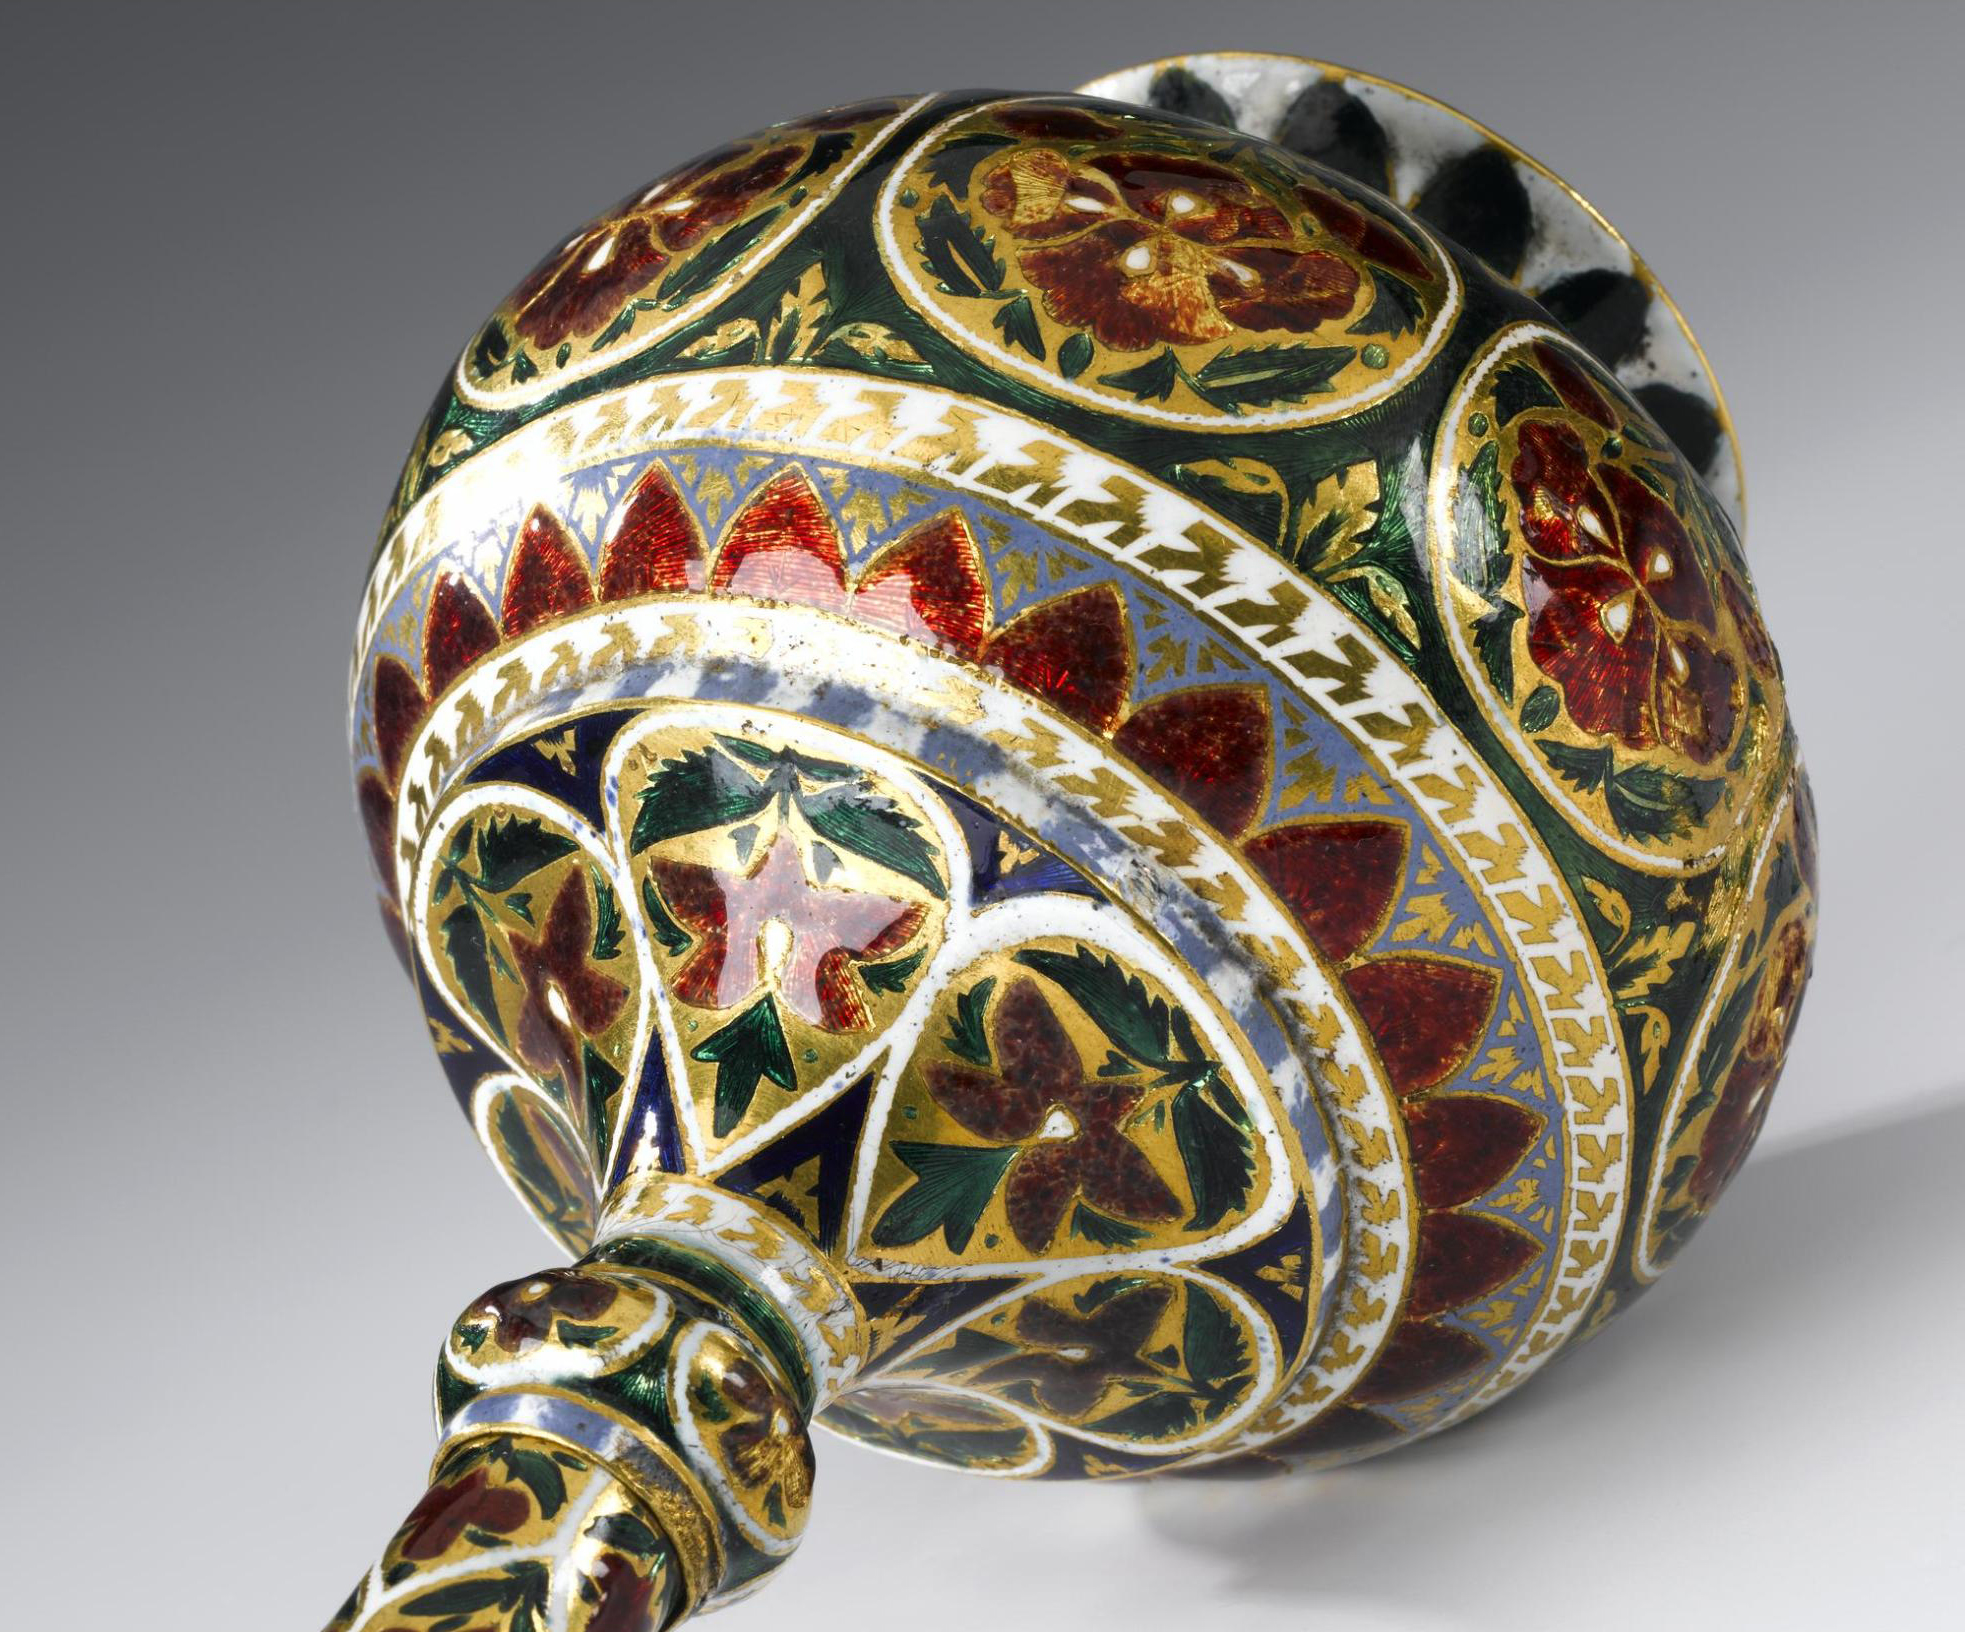 Bottle of gold, decorated with Jaipur enamel in transparent green, brilliant ruby-red and dark blue: Northern India, Rajasthan, 1800-1850, formerly in the possession of Maharaja Duleep Singh.